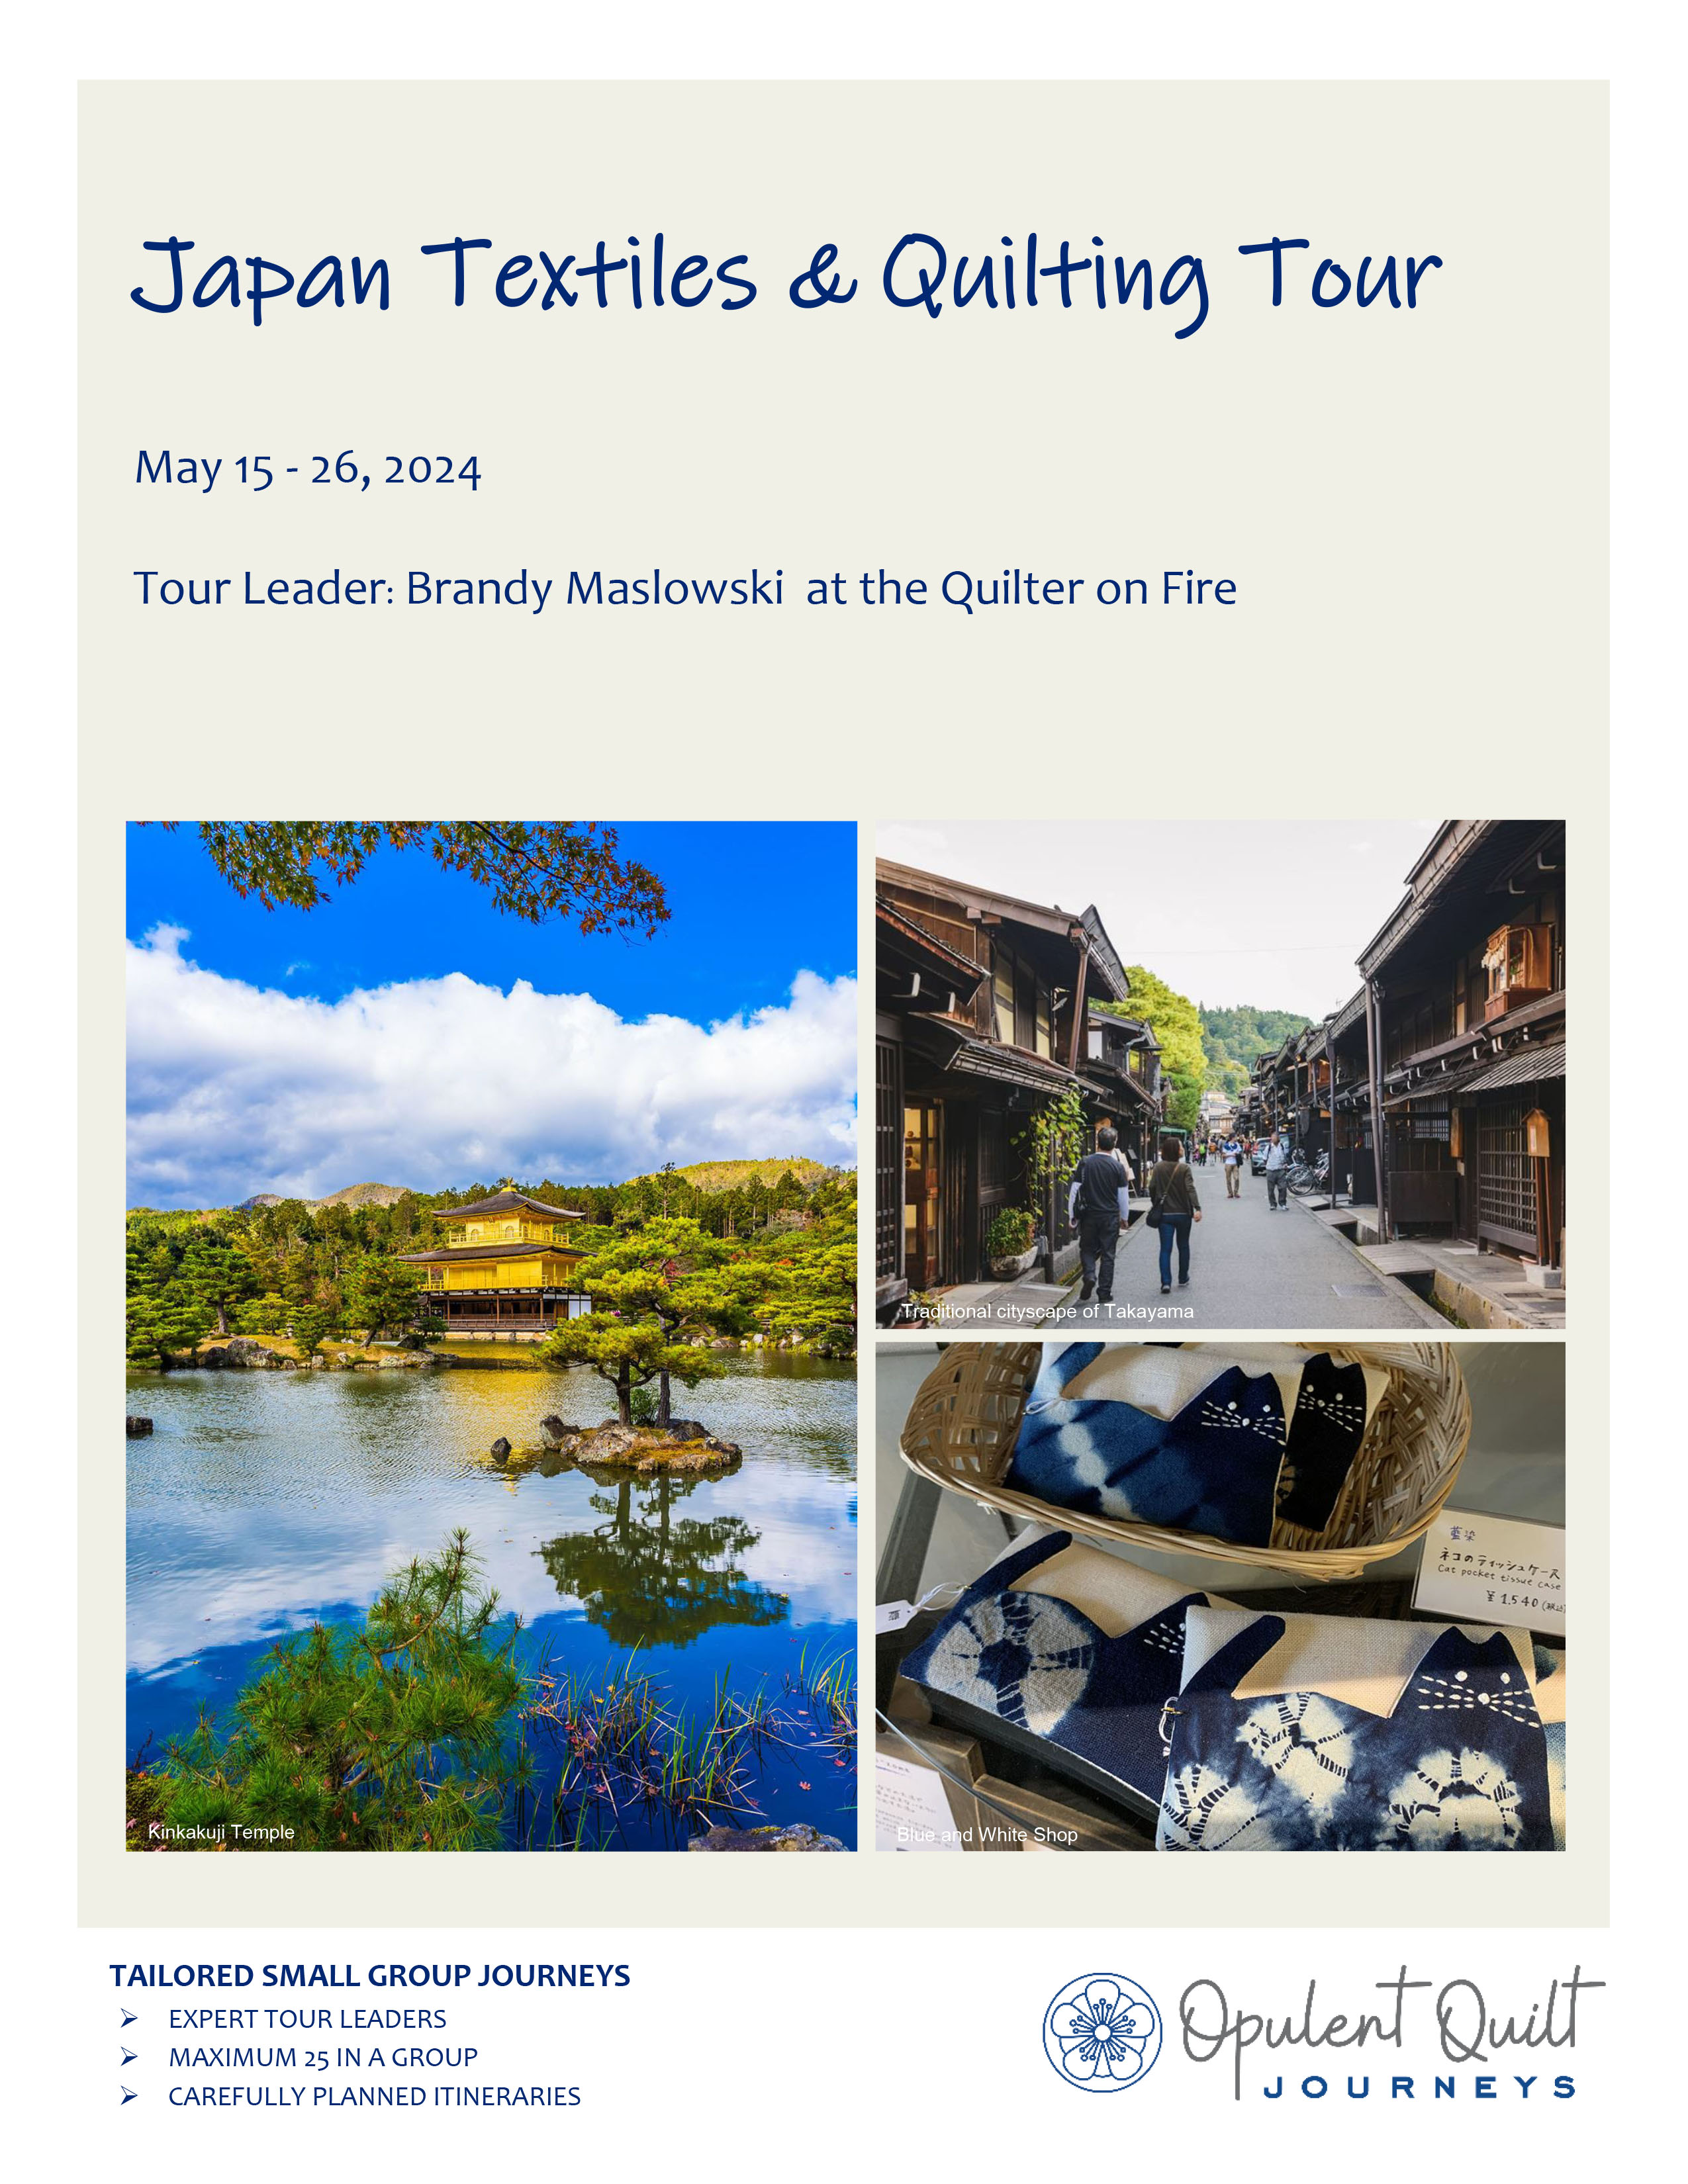 Japan Textiles Tour with Quilter on Fire brochure